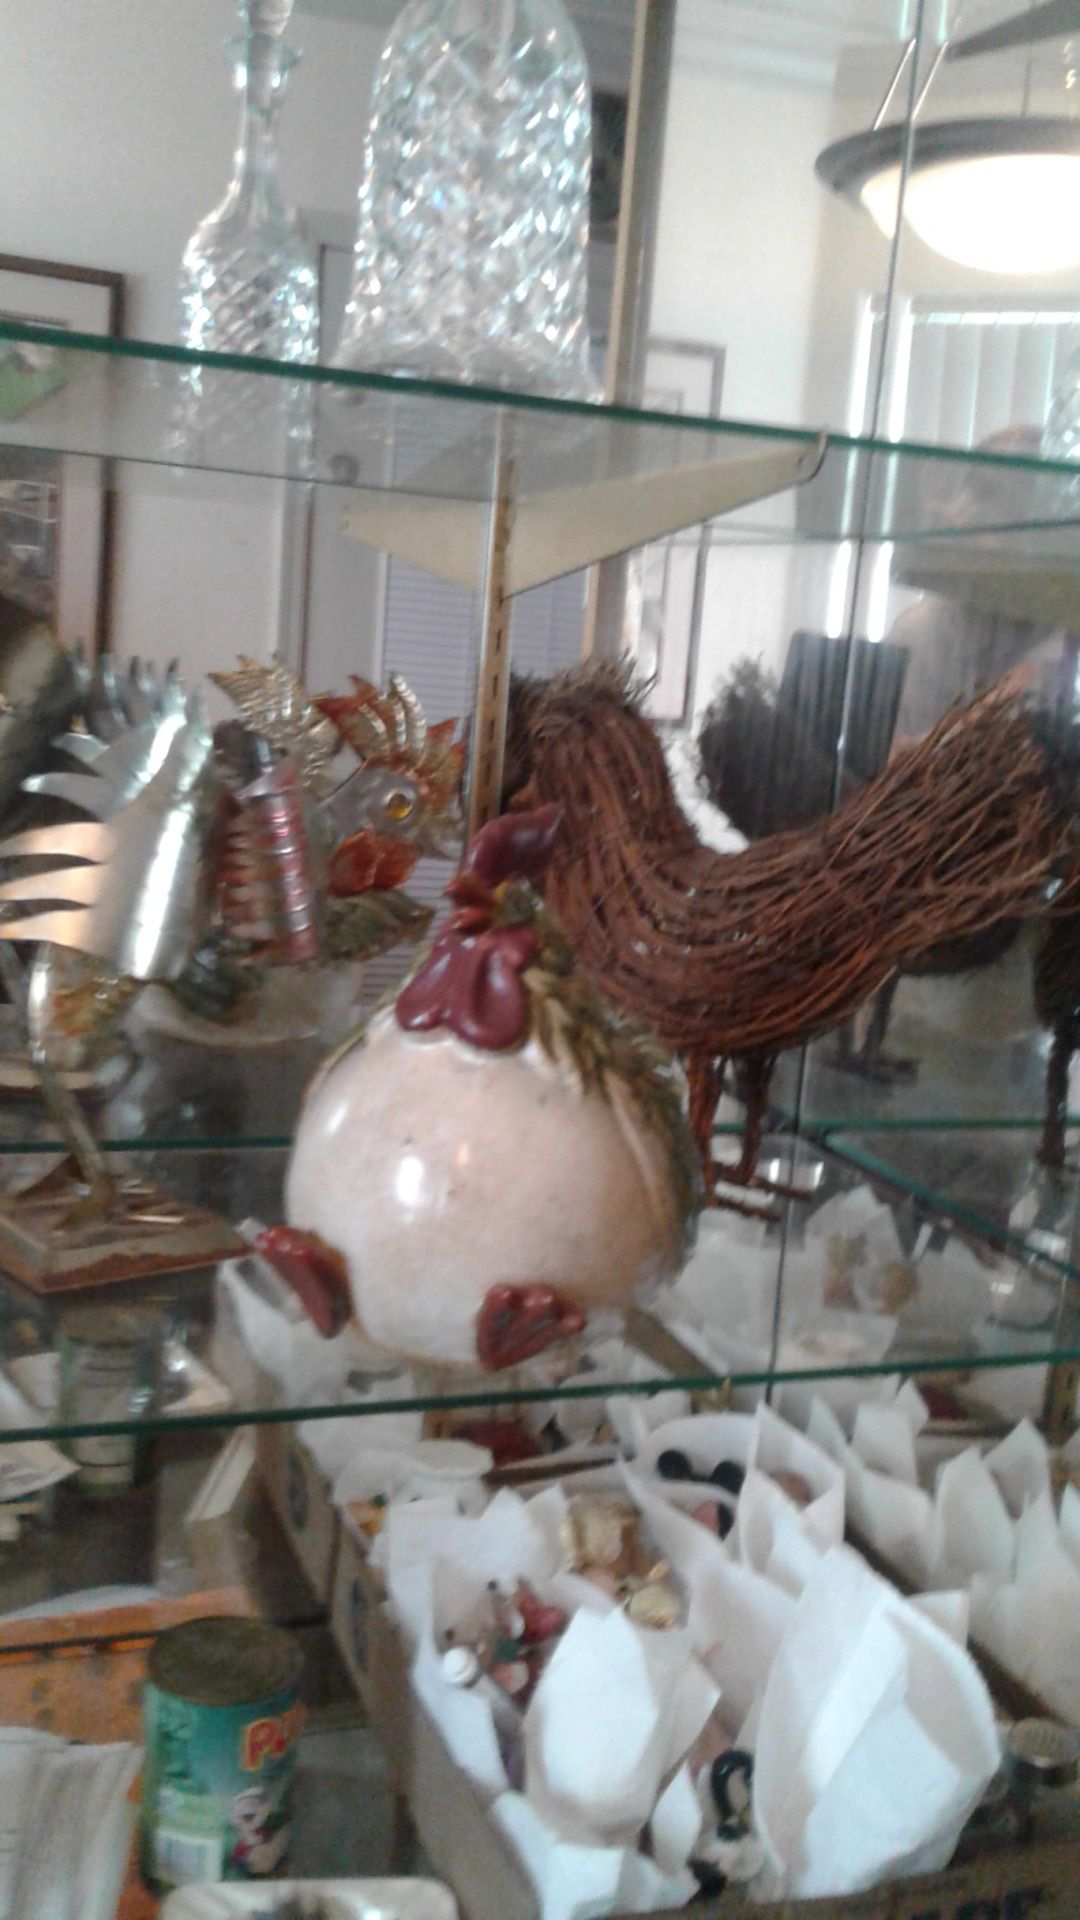 Little collection of three roosters decor